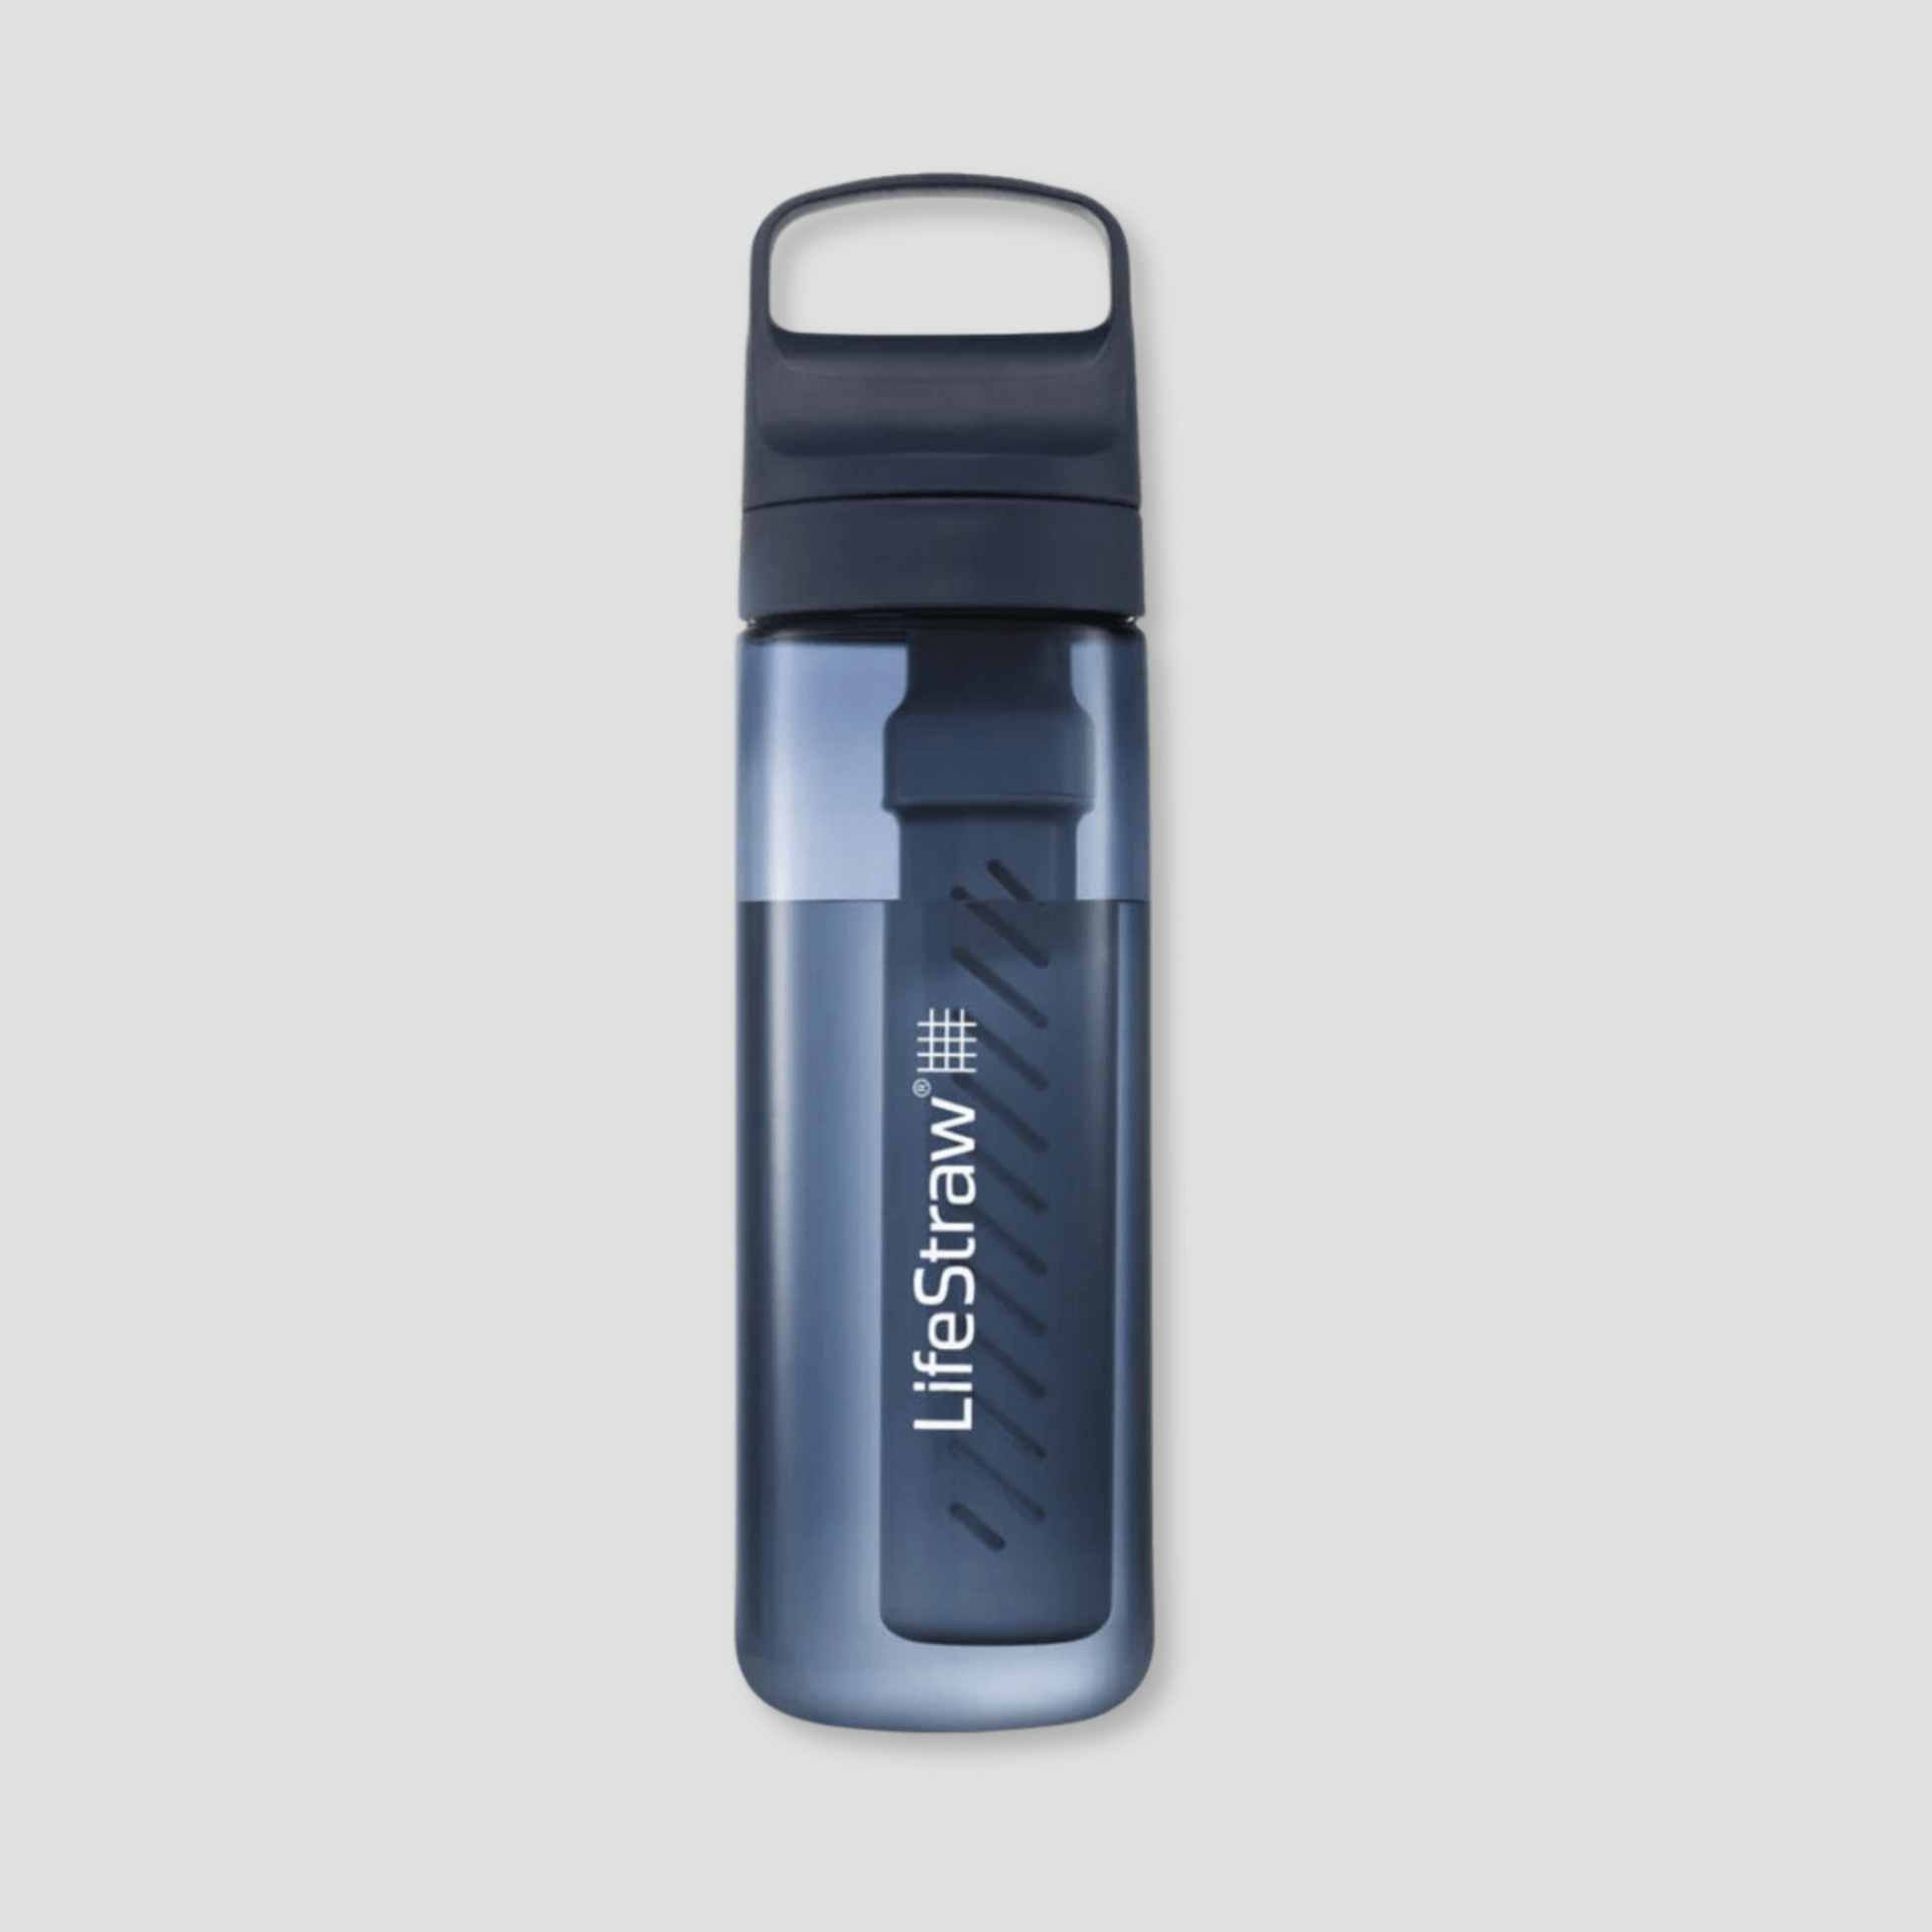 22oz LifeStraw Go Water Bottle with filter in blue